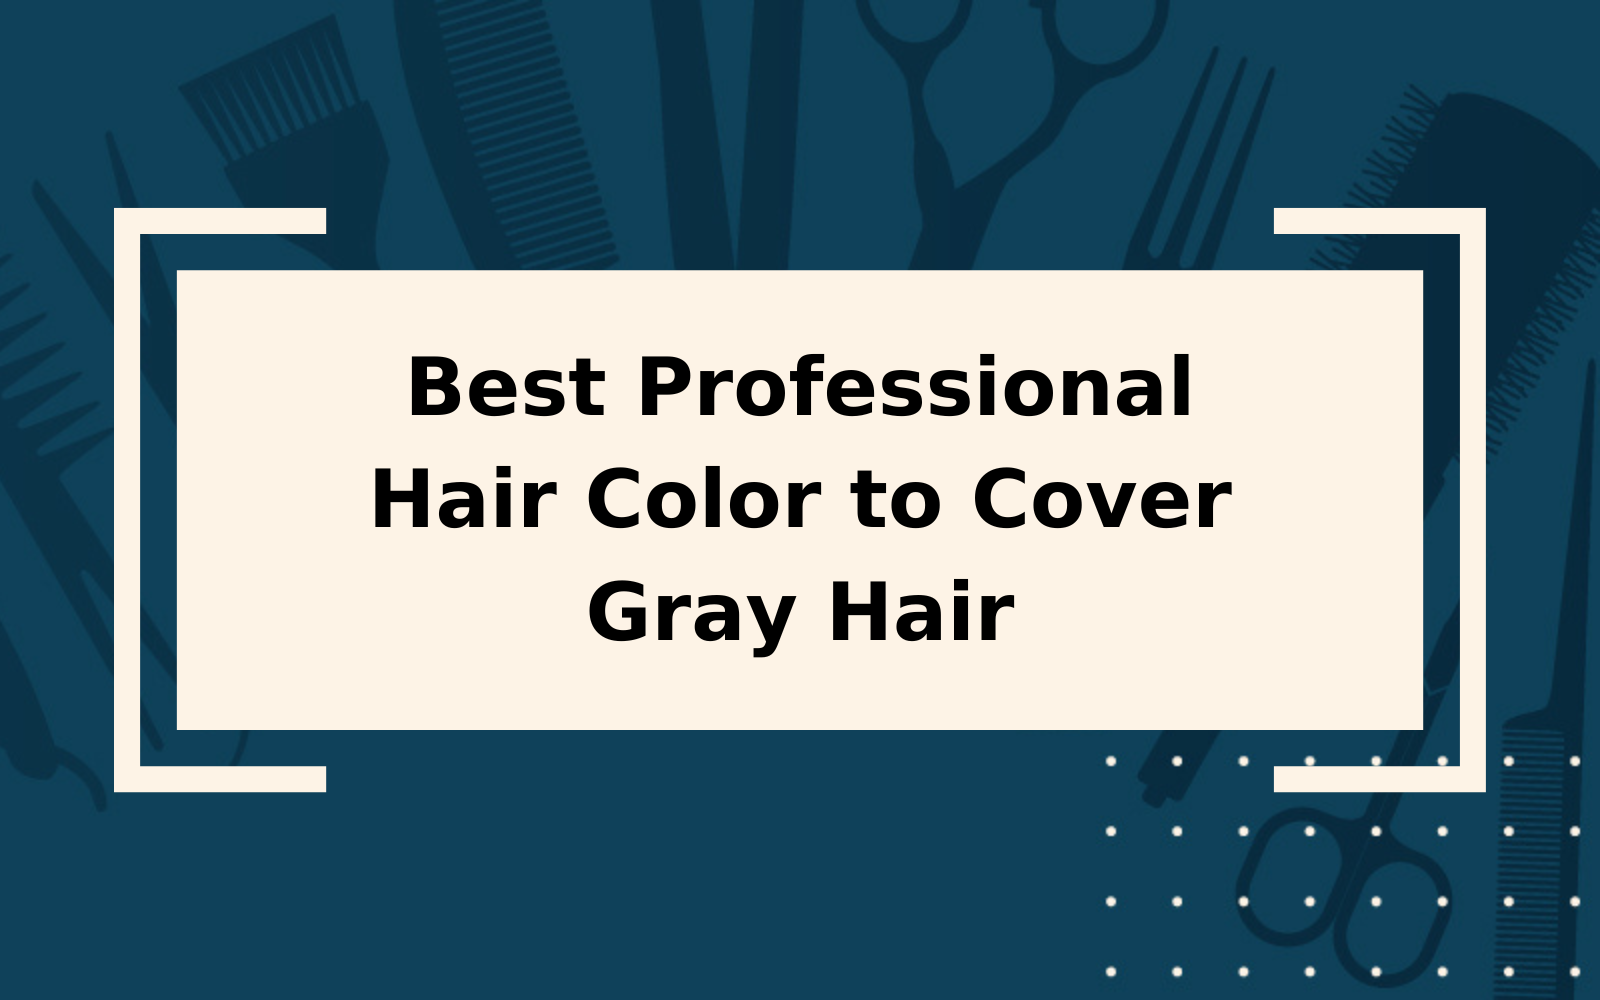 Finding the Best Professional Hair Color to Cover Gray Hair